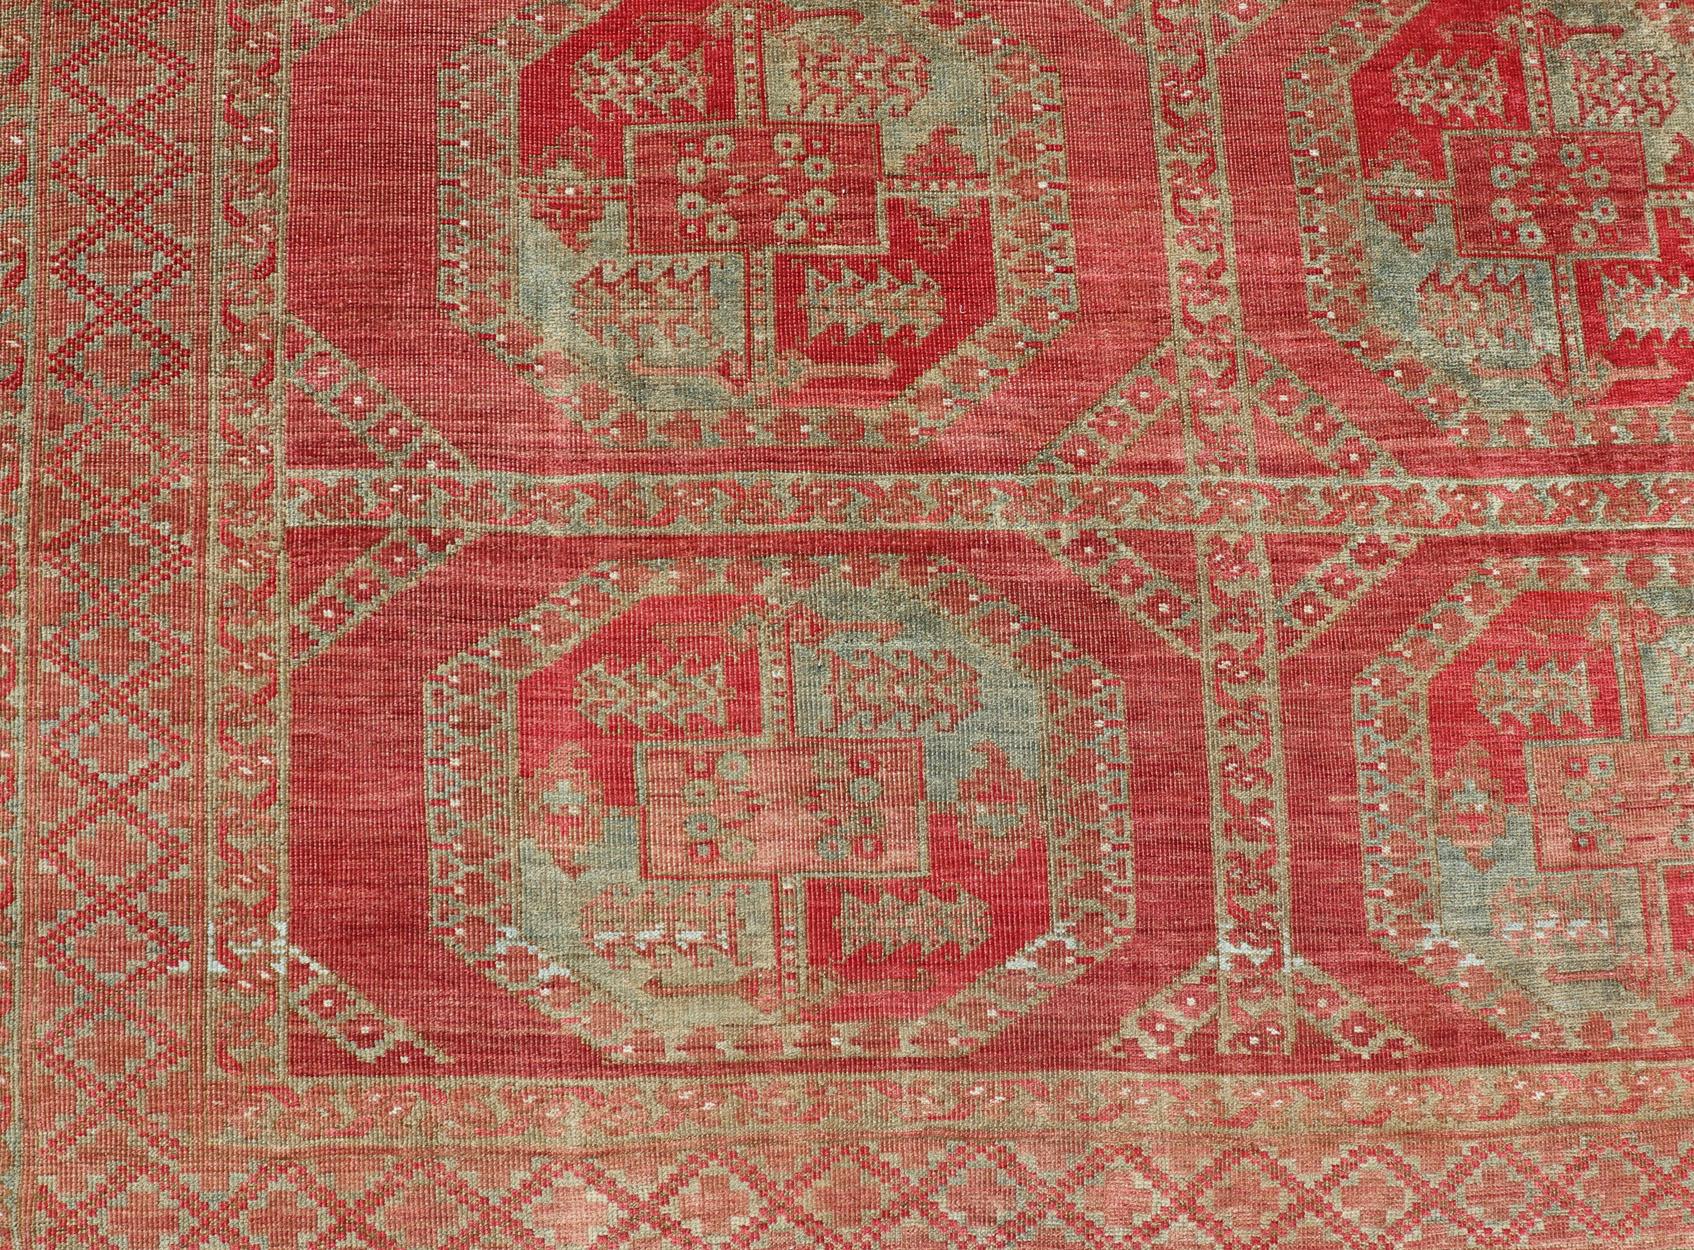 Turkestan Hand-Knotted Wool Ersari Rug in Wool with Gul Design in Shades of Red & Green